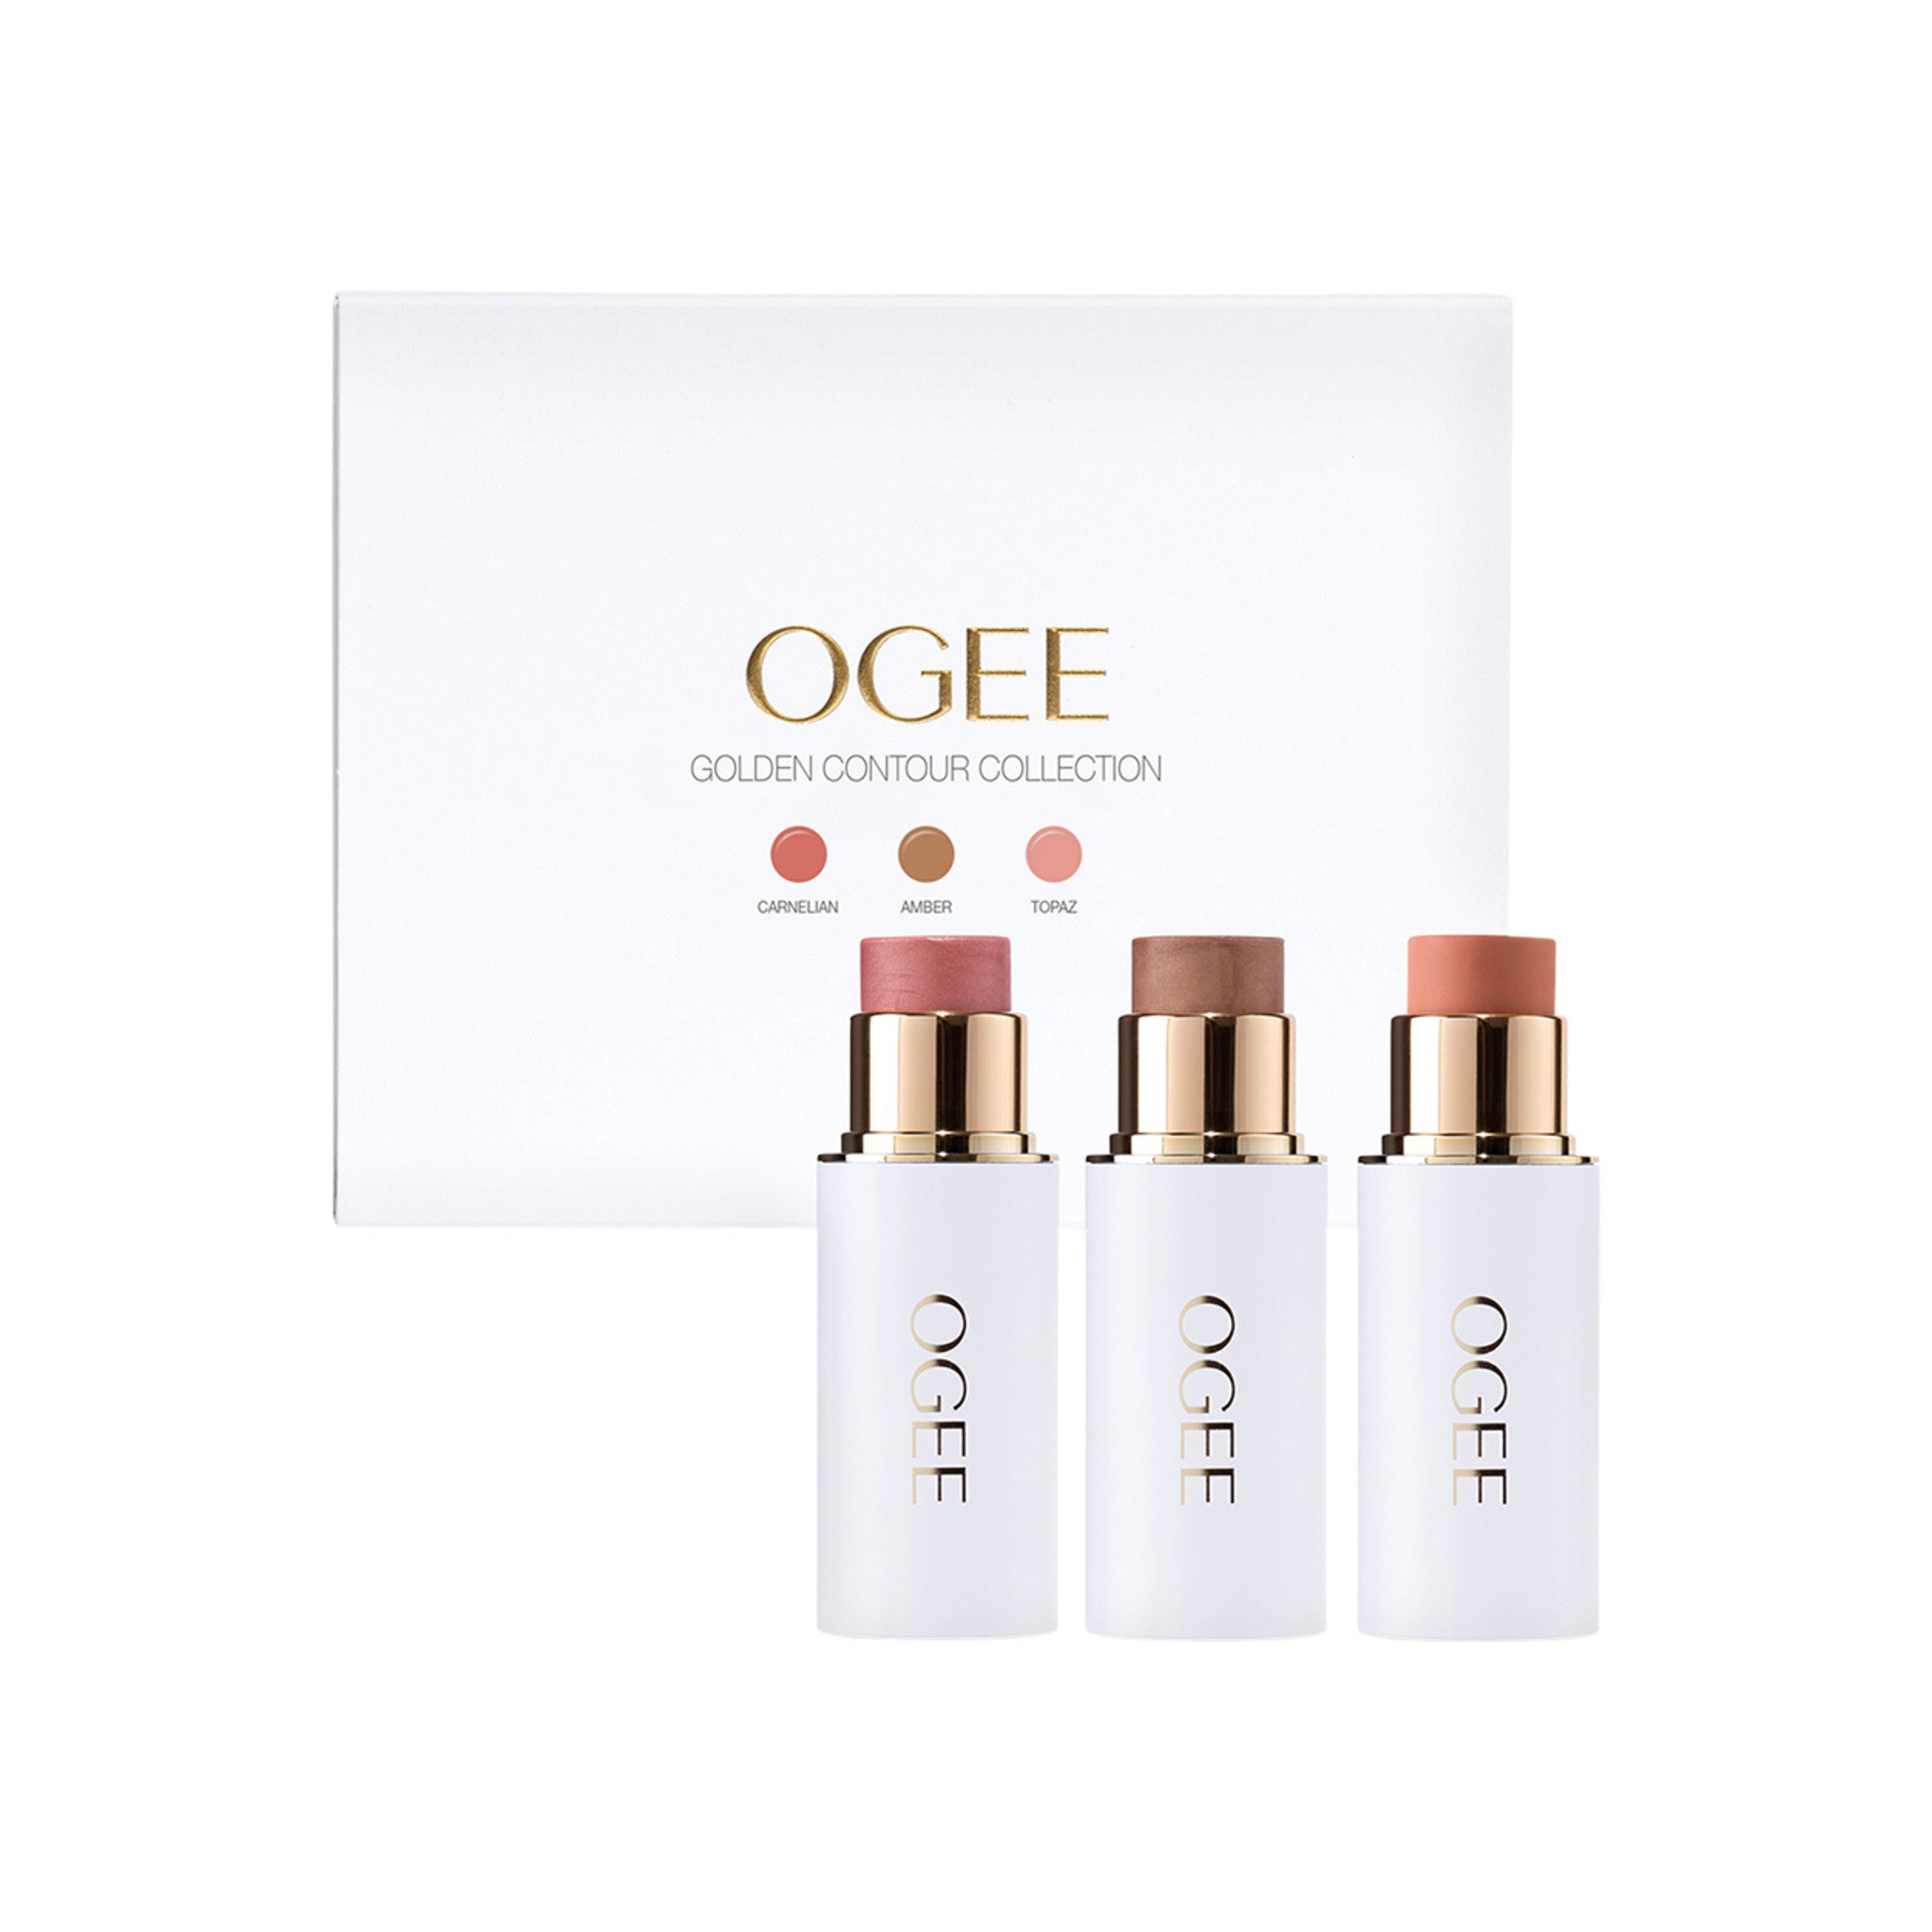 Ogee Golden Contour Collection main image. This product is in the color multi